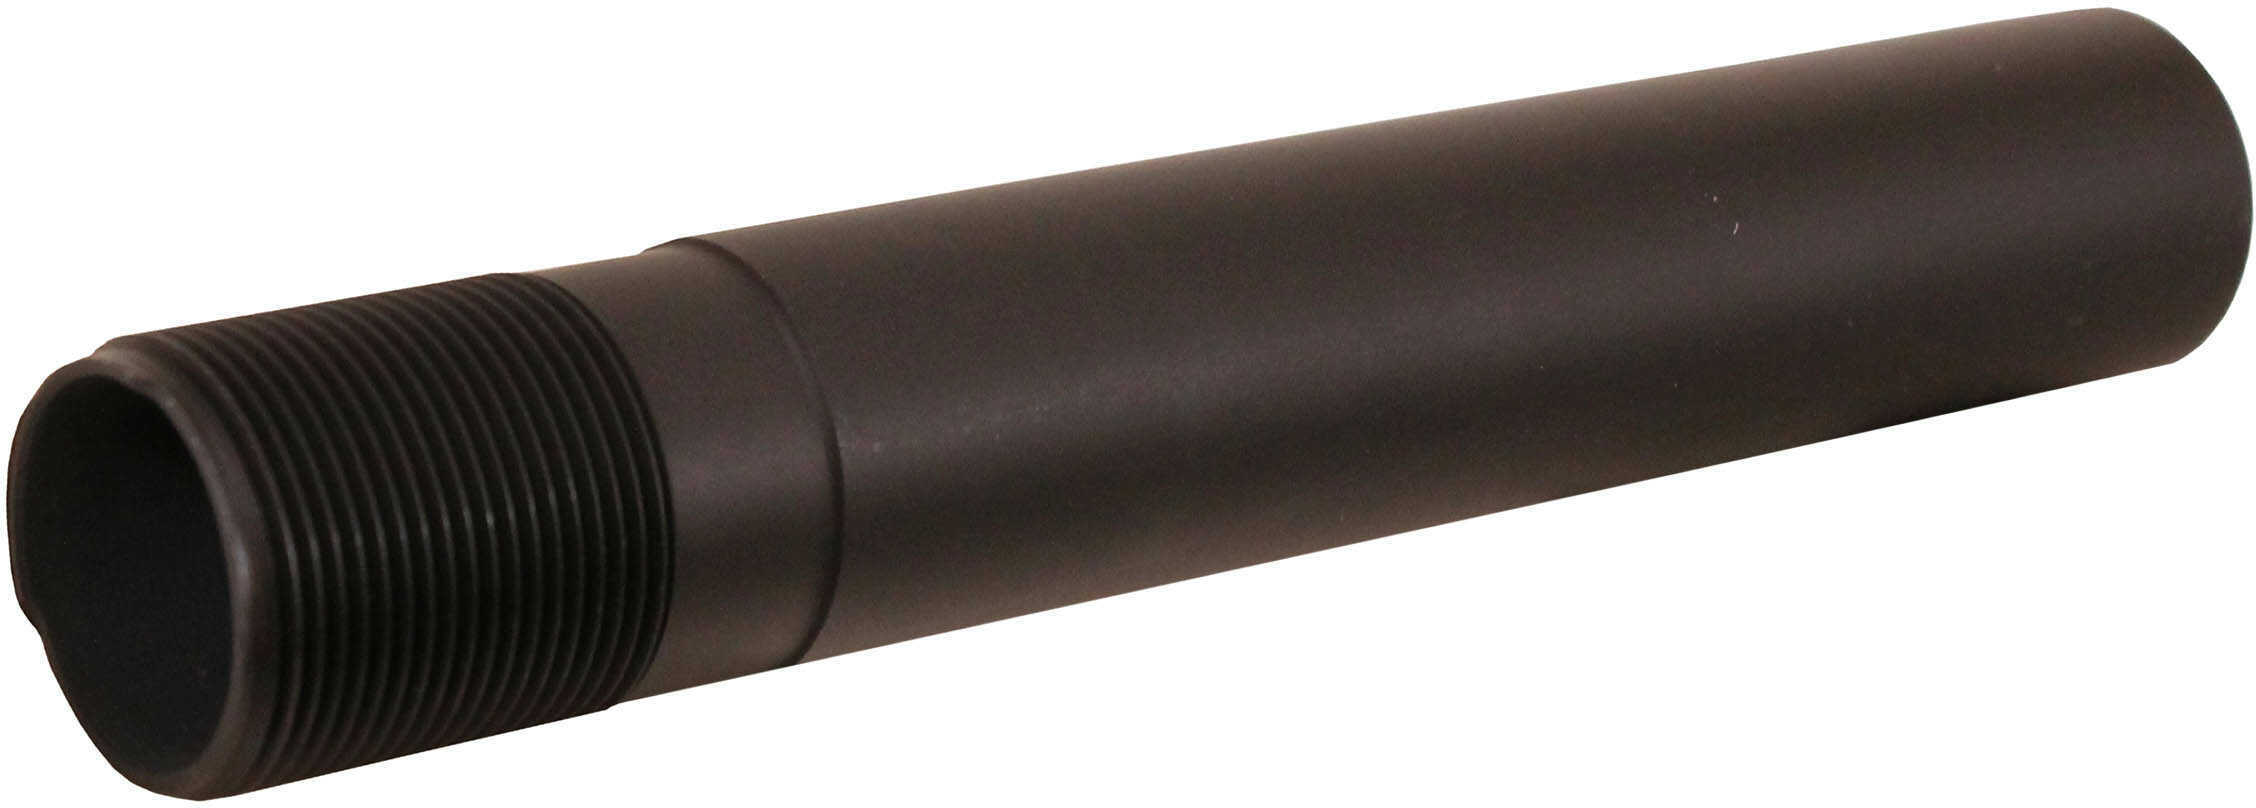 Leapers AR Pistol Receiver Extension Tube Md: TLU008